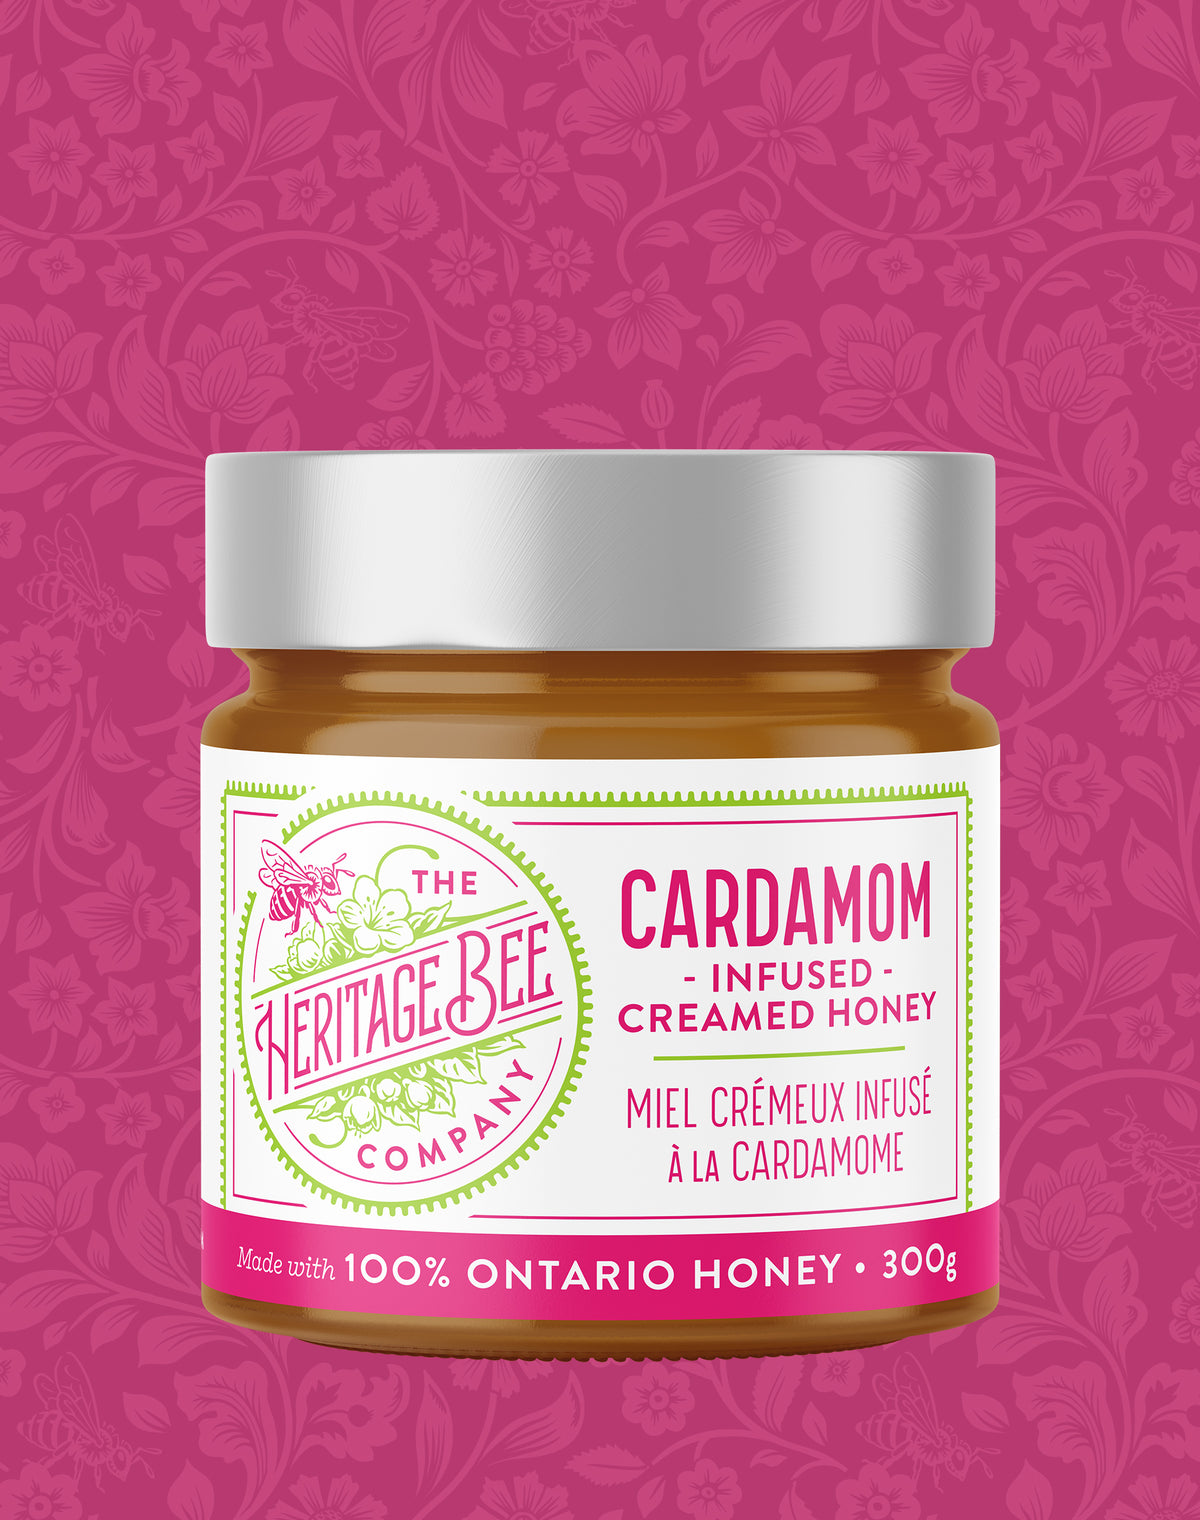 Heritage Bee Co's Cardamom infused creamed honey made locally with 100% Ontario Honey. Premium and handcrafted. 